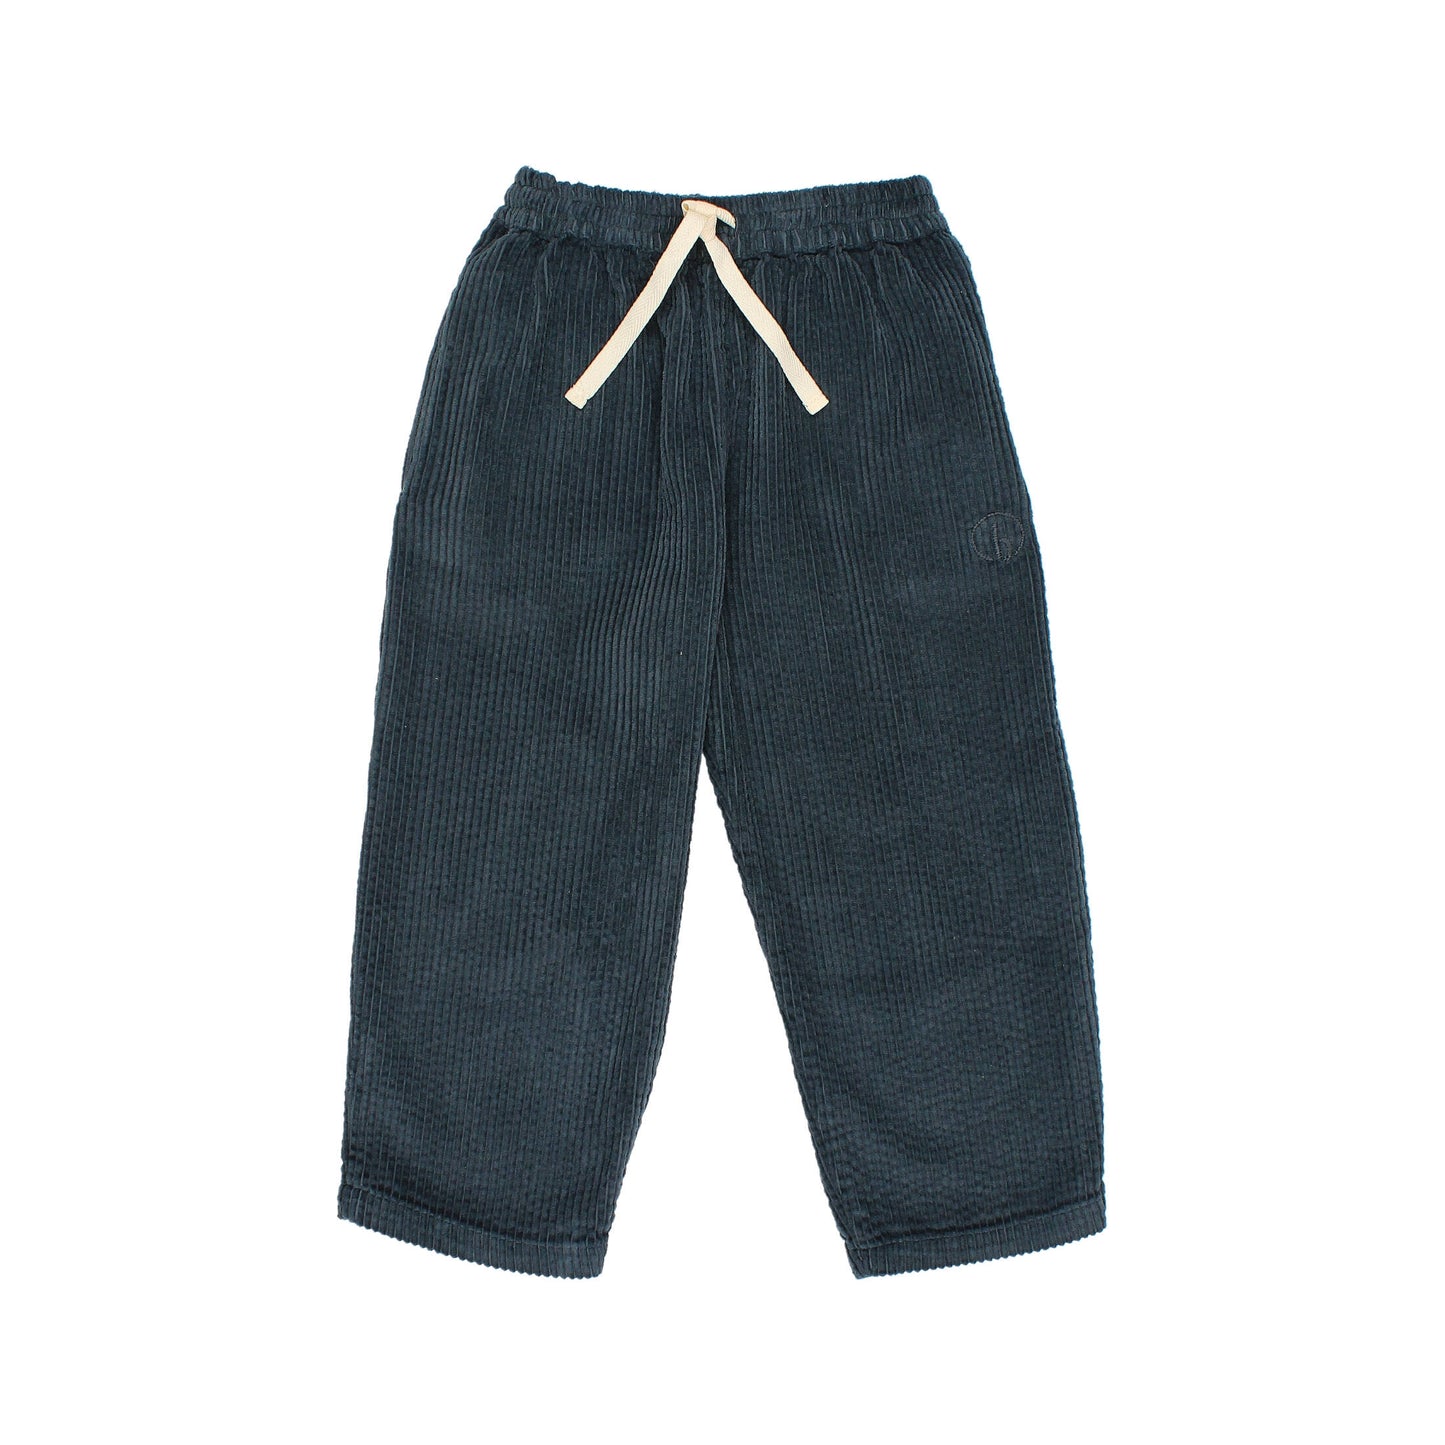 PANTS VELLUTO DEEP FOREST